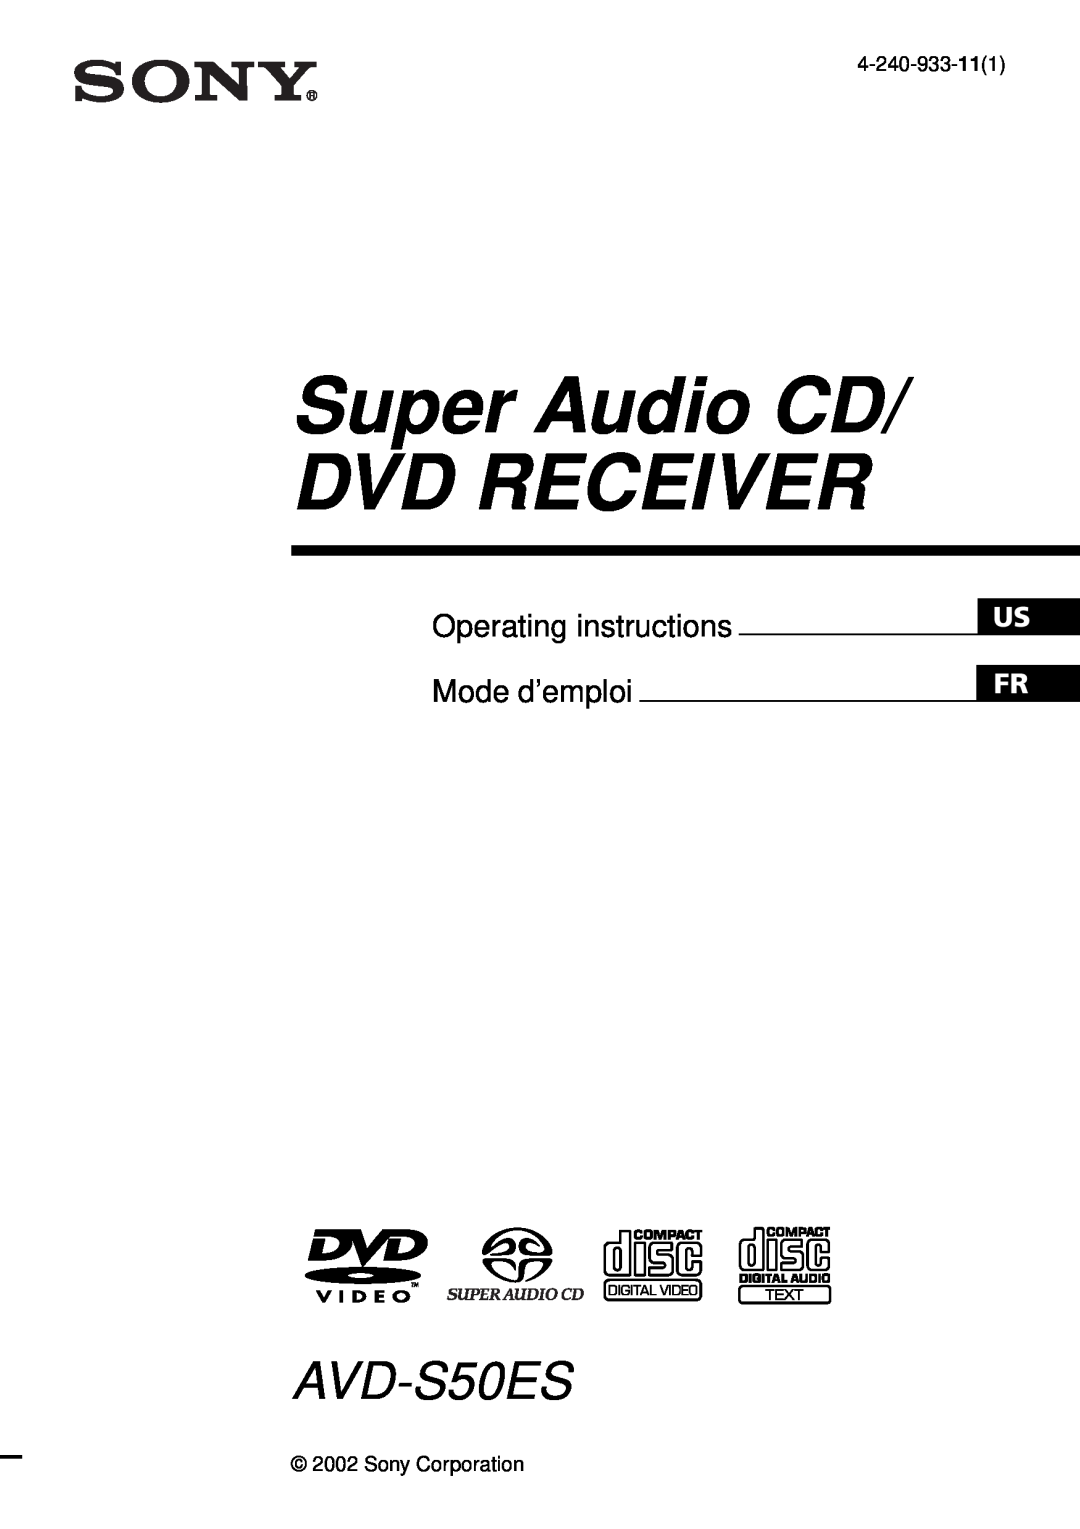 Sony AVD-S50ES operating instructions Operating instructions, Mode d’emploi, Super Audio CD DVD RECEIVER 